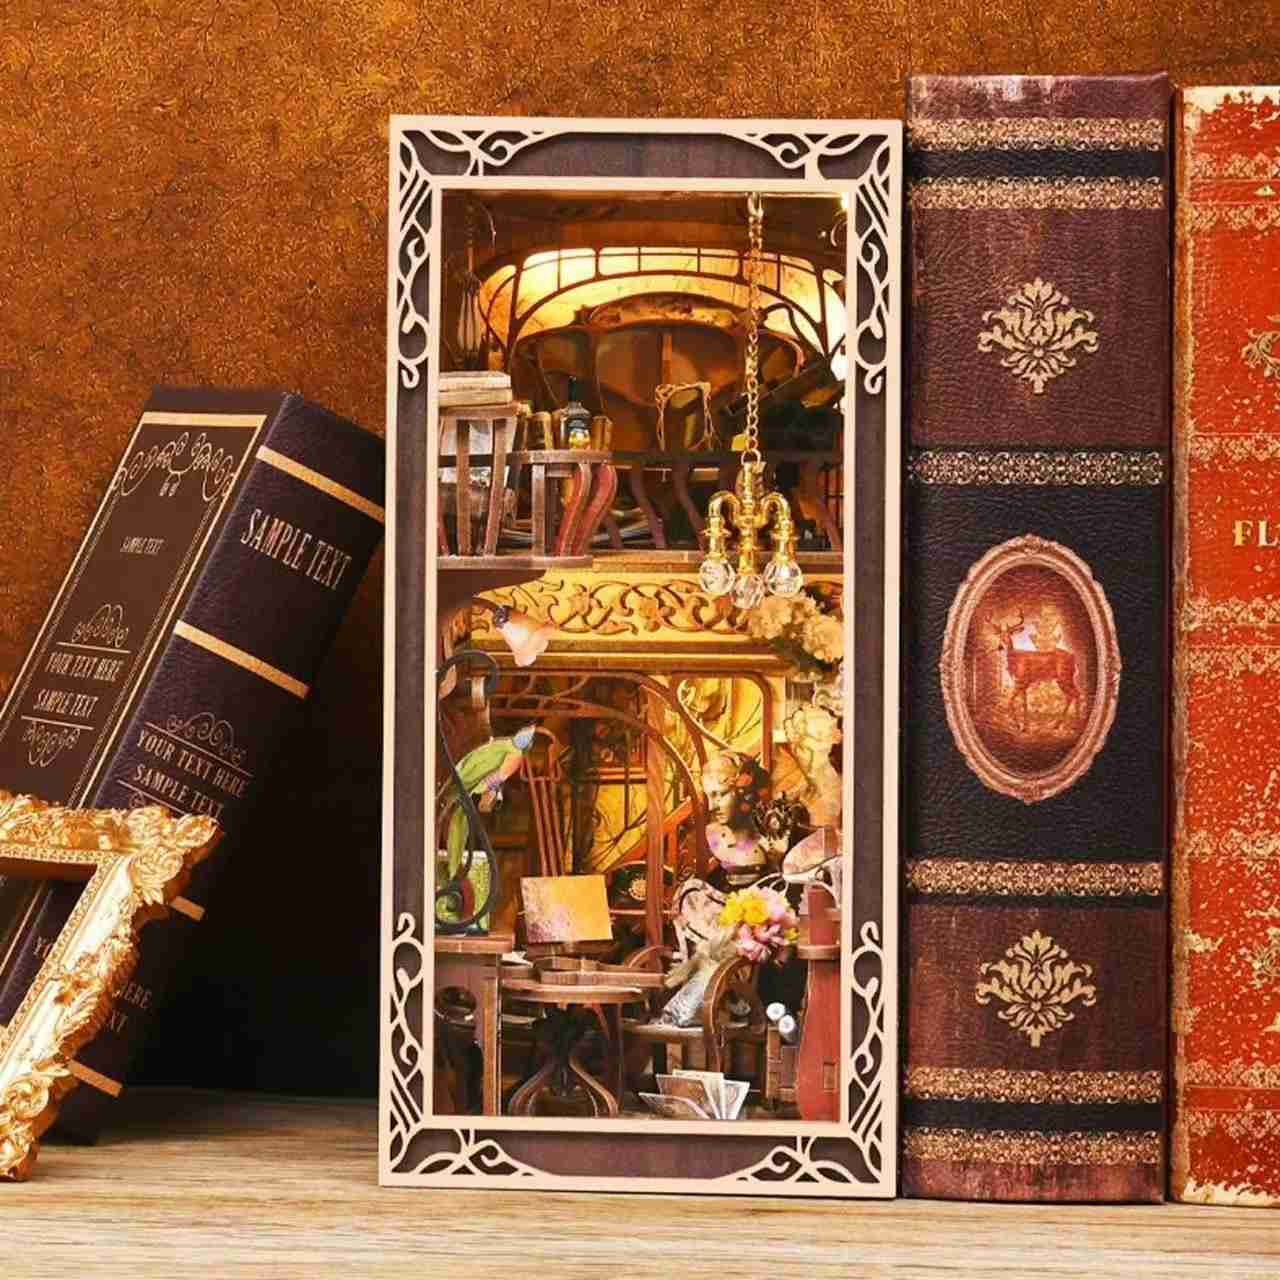 Painter's Day at Dusk DIY Book Nook Kit , A charming miniature 3d wooden puzzles inspired Art Nouveau, perfect for bookshelf decor, and dollhouse collectors, or a gift for art lovers and DIY enthusiasts, front side